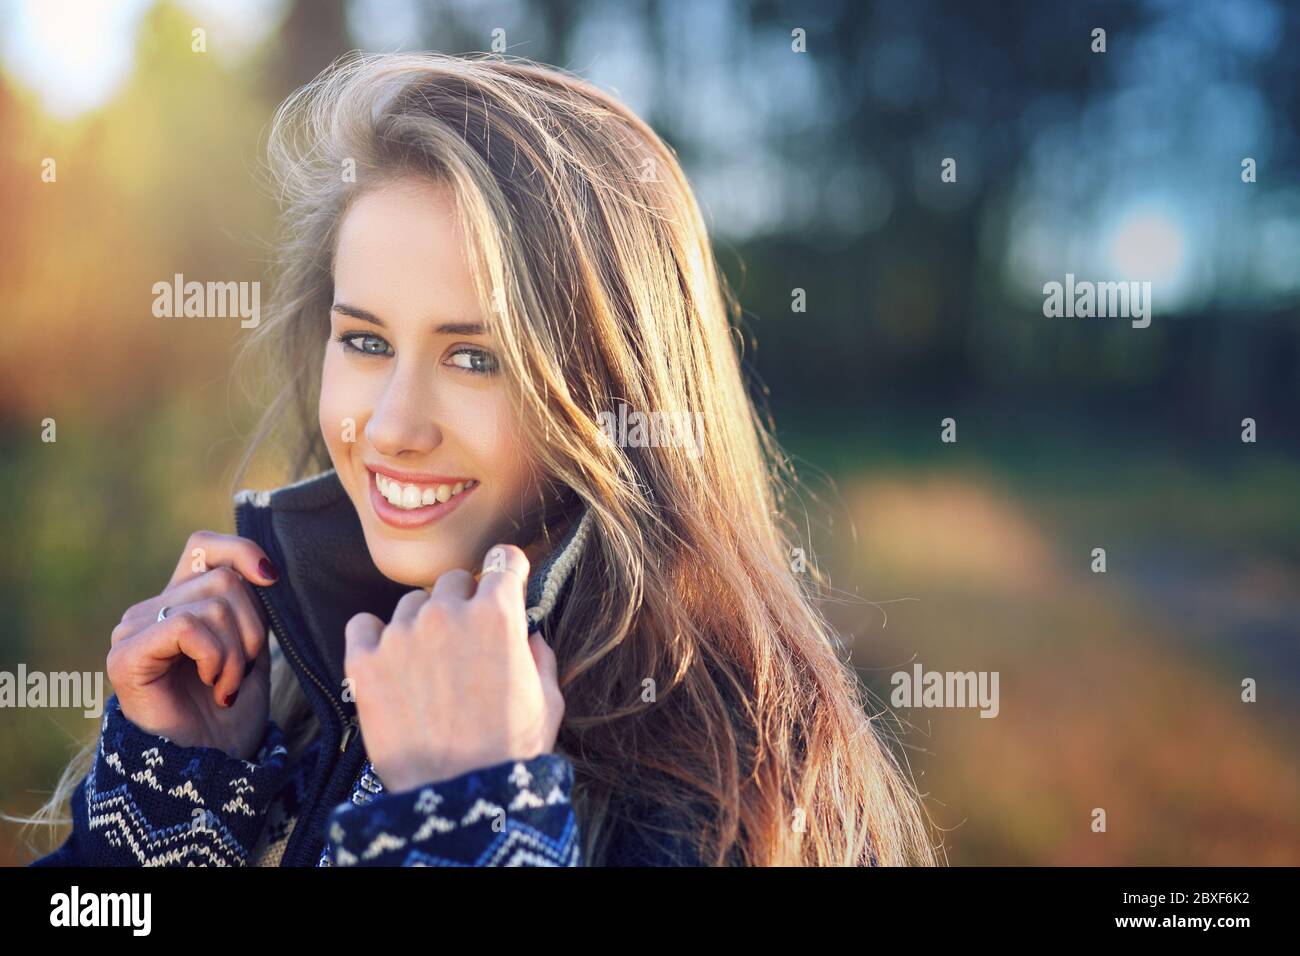 Natural backlight portrait of a smiling girl in sunset light. Stock Photo